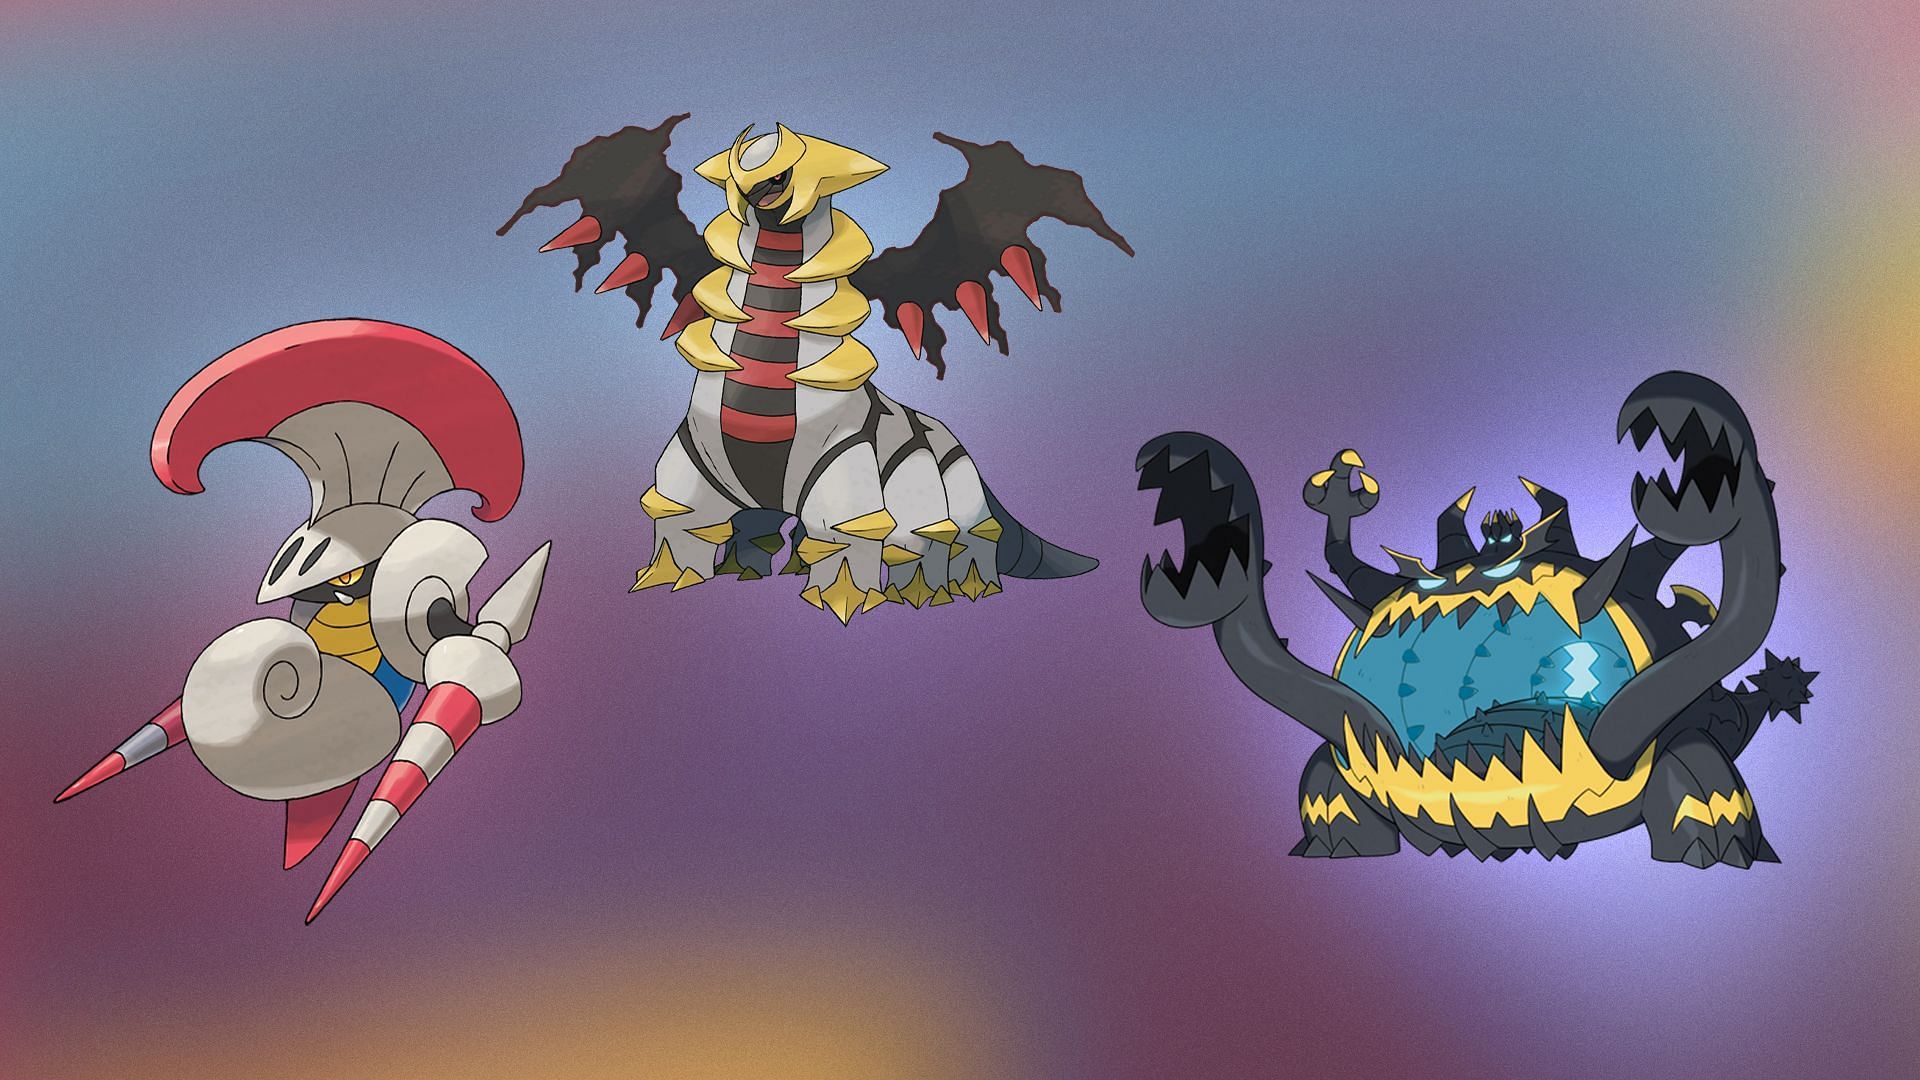 Pokémon GO Hub - Best counters to defeat the Ultra Beast Guzzlord